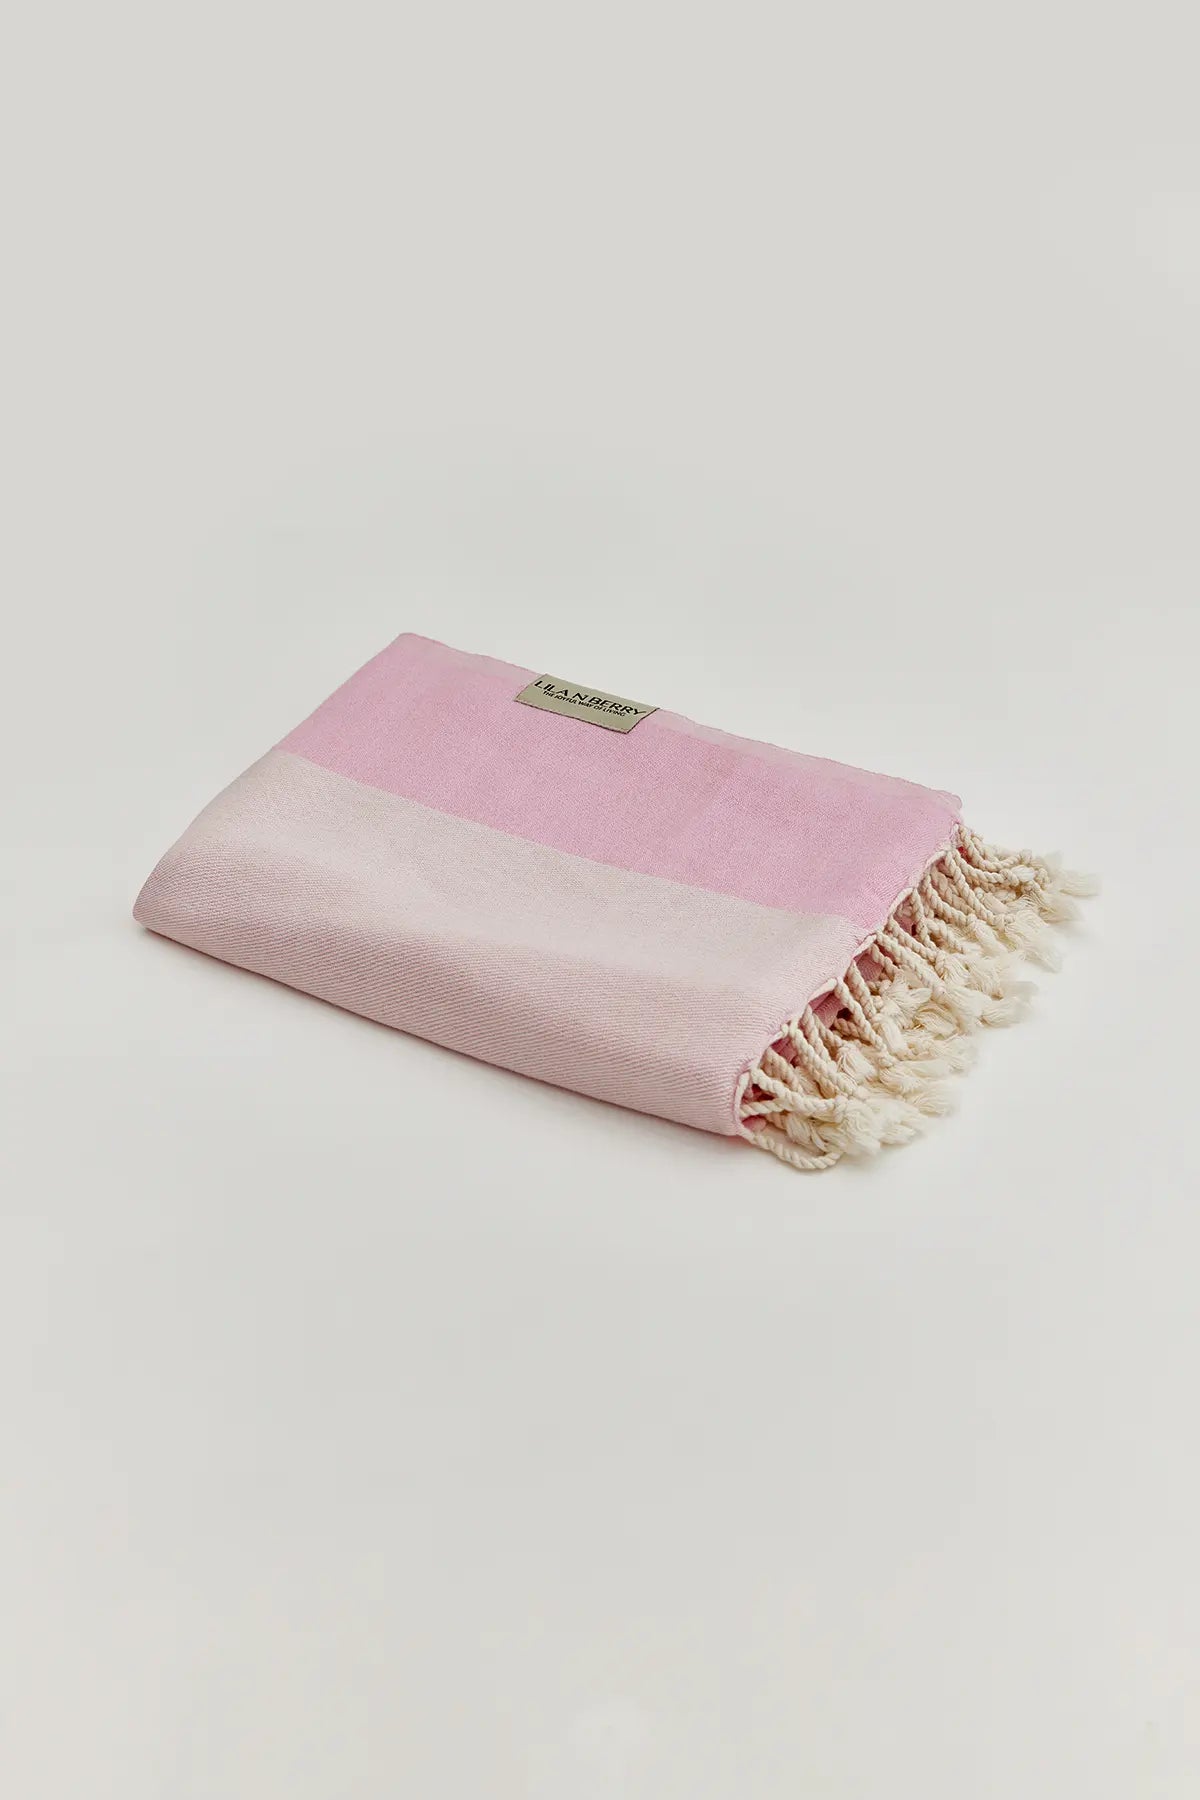 Beach/Bath,Pink Blush,Turkish towel, folded,summer,line patterned,double-faces,purified sand,light,compact, easy pack,fun, recycled